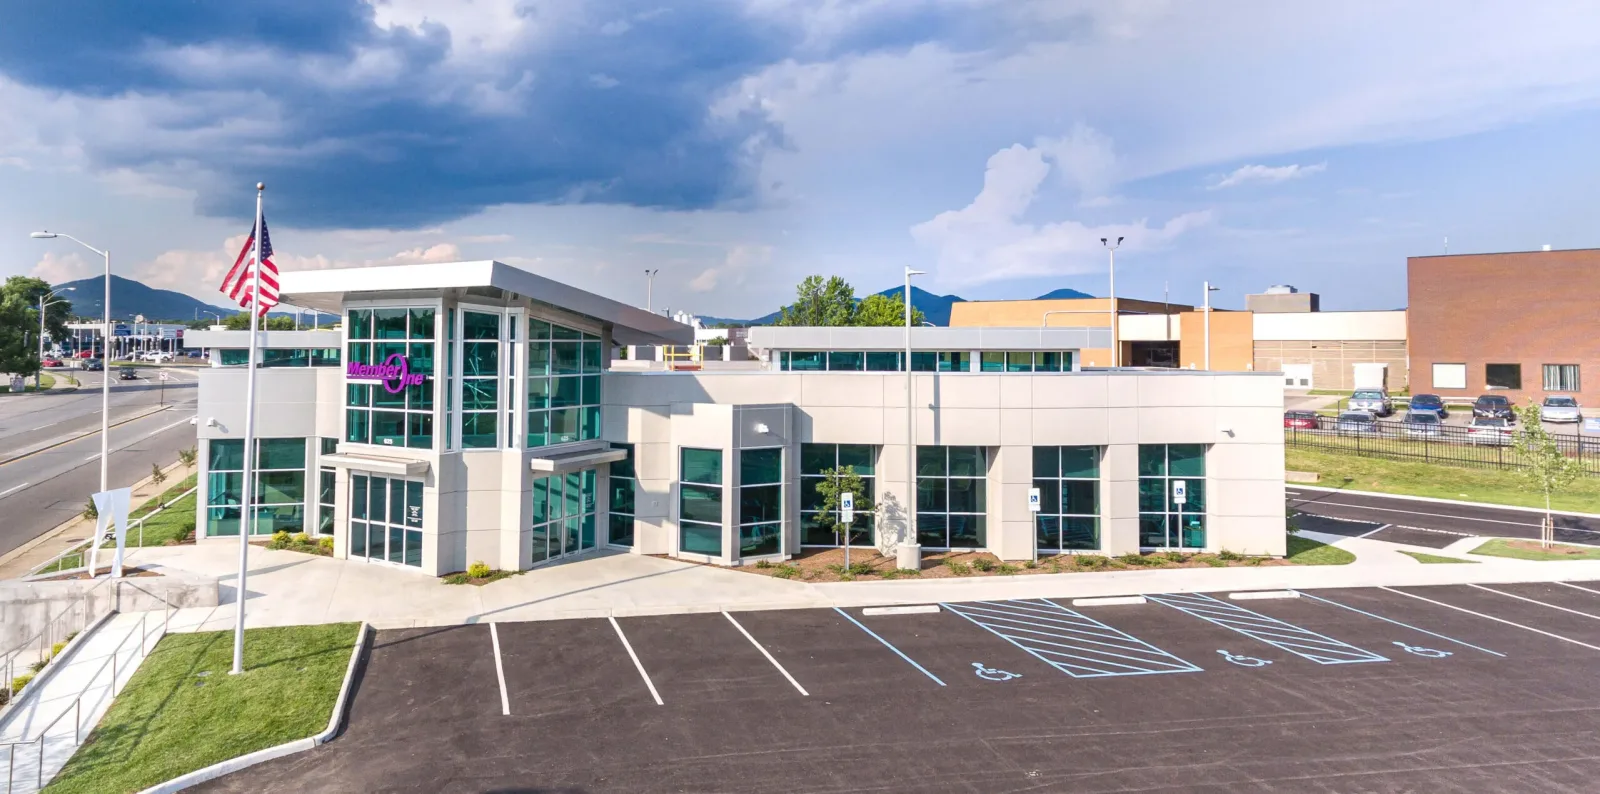 The exterior of the Member One Credit Union Service Center building in Roanoke, Virginia.